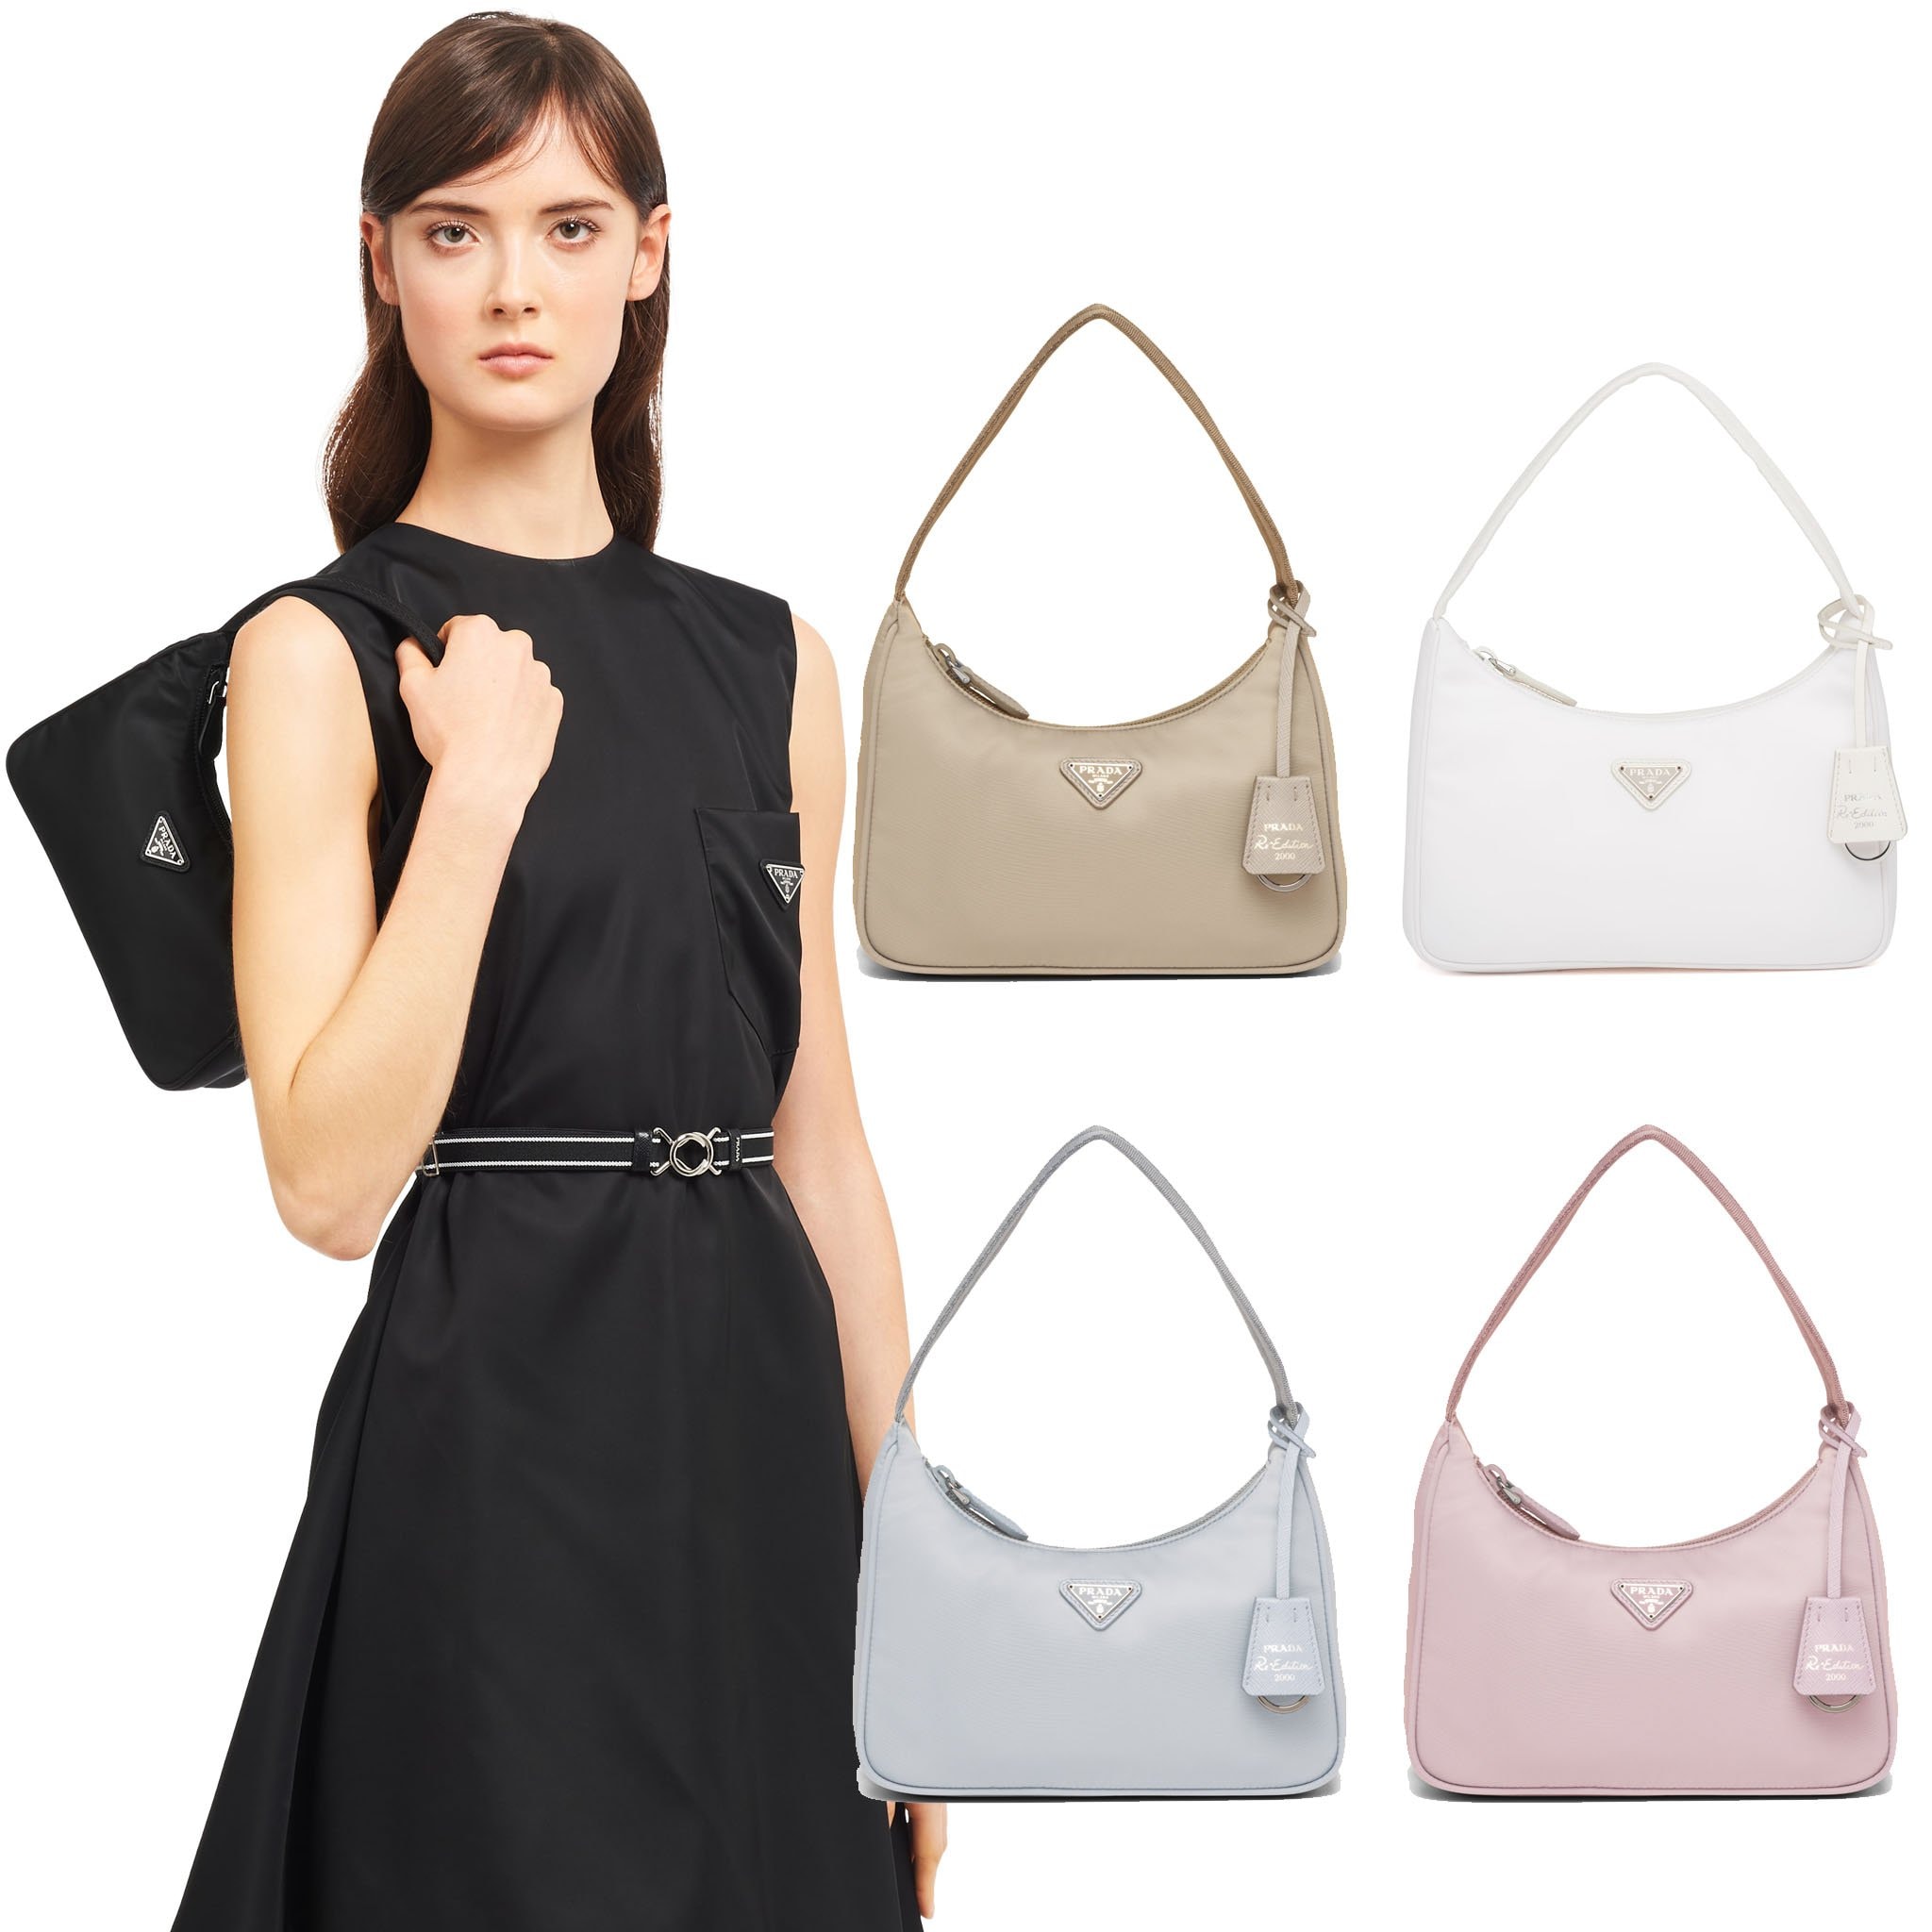 The Re-Nylon Re-Edition comes in a variety of colors, from the classic neutrals to cornflower blue and alabaster pink